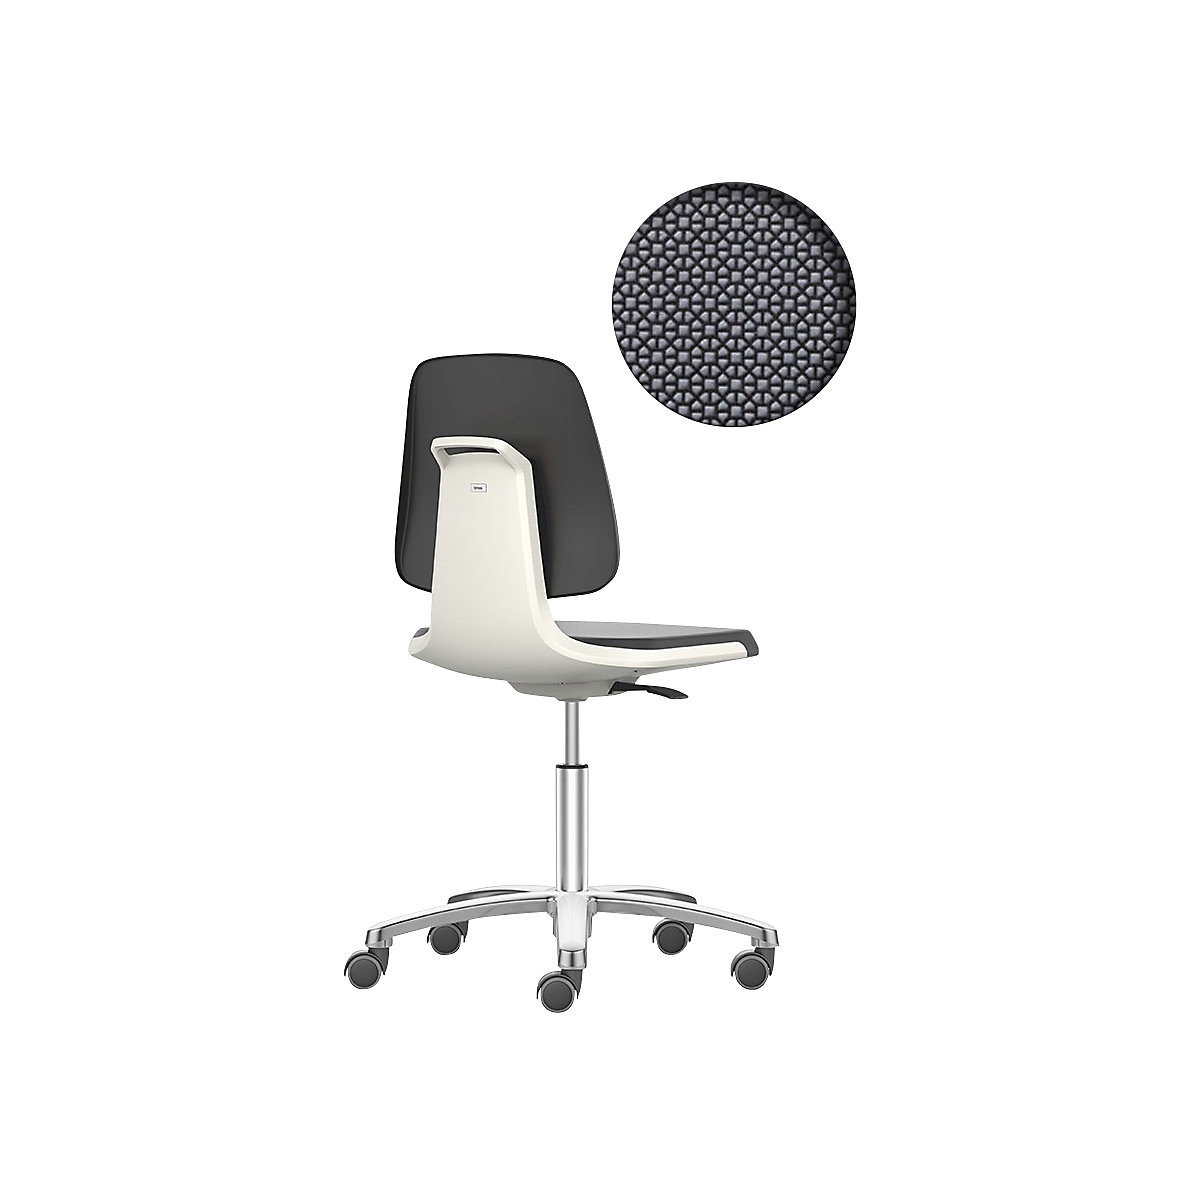 LABSIT industrial swivel chair – bimos, five-star base with castors, Supertec seat, white-15